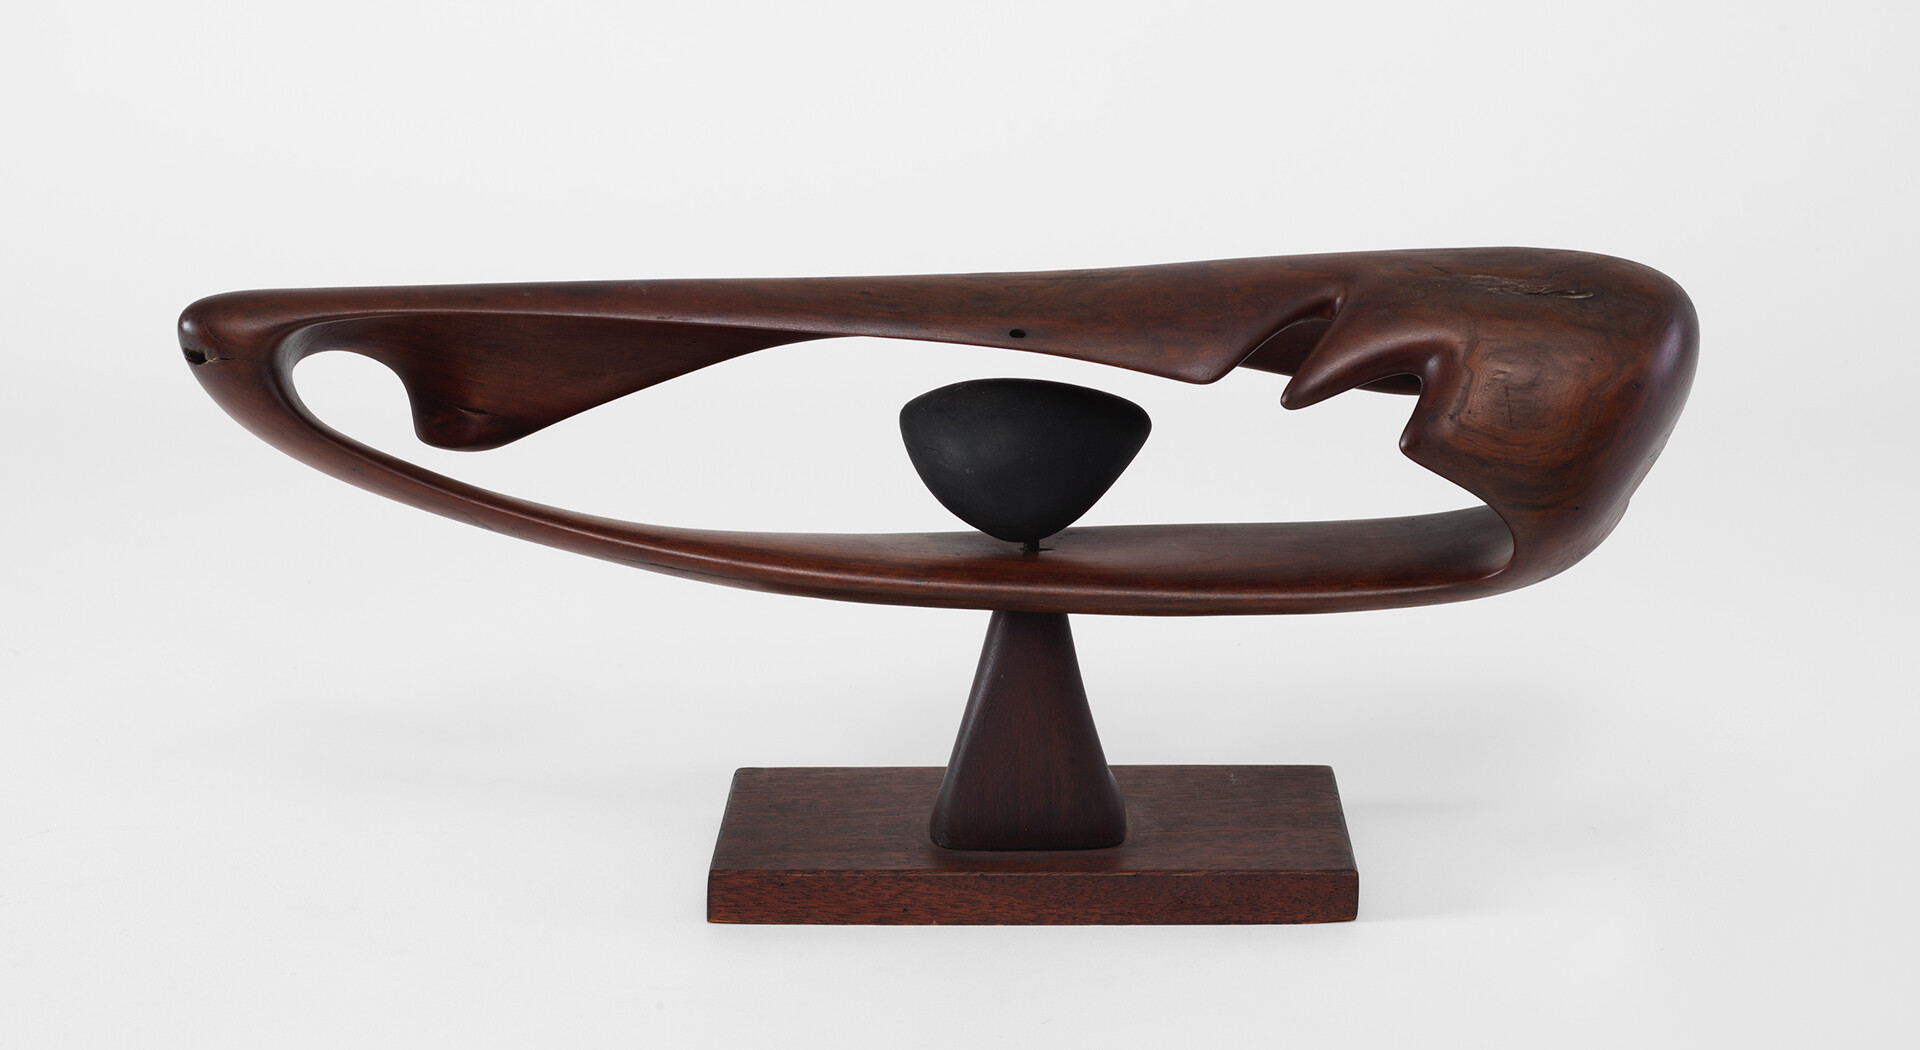 A sculpture by Leo Amino, titled Chrysalis, dated 1953.